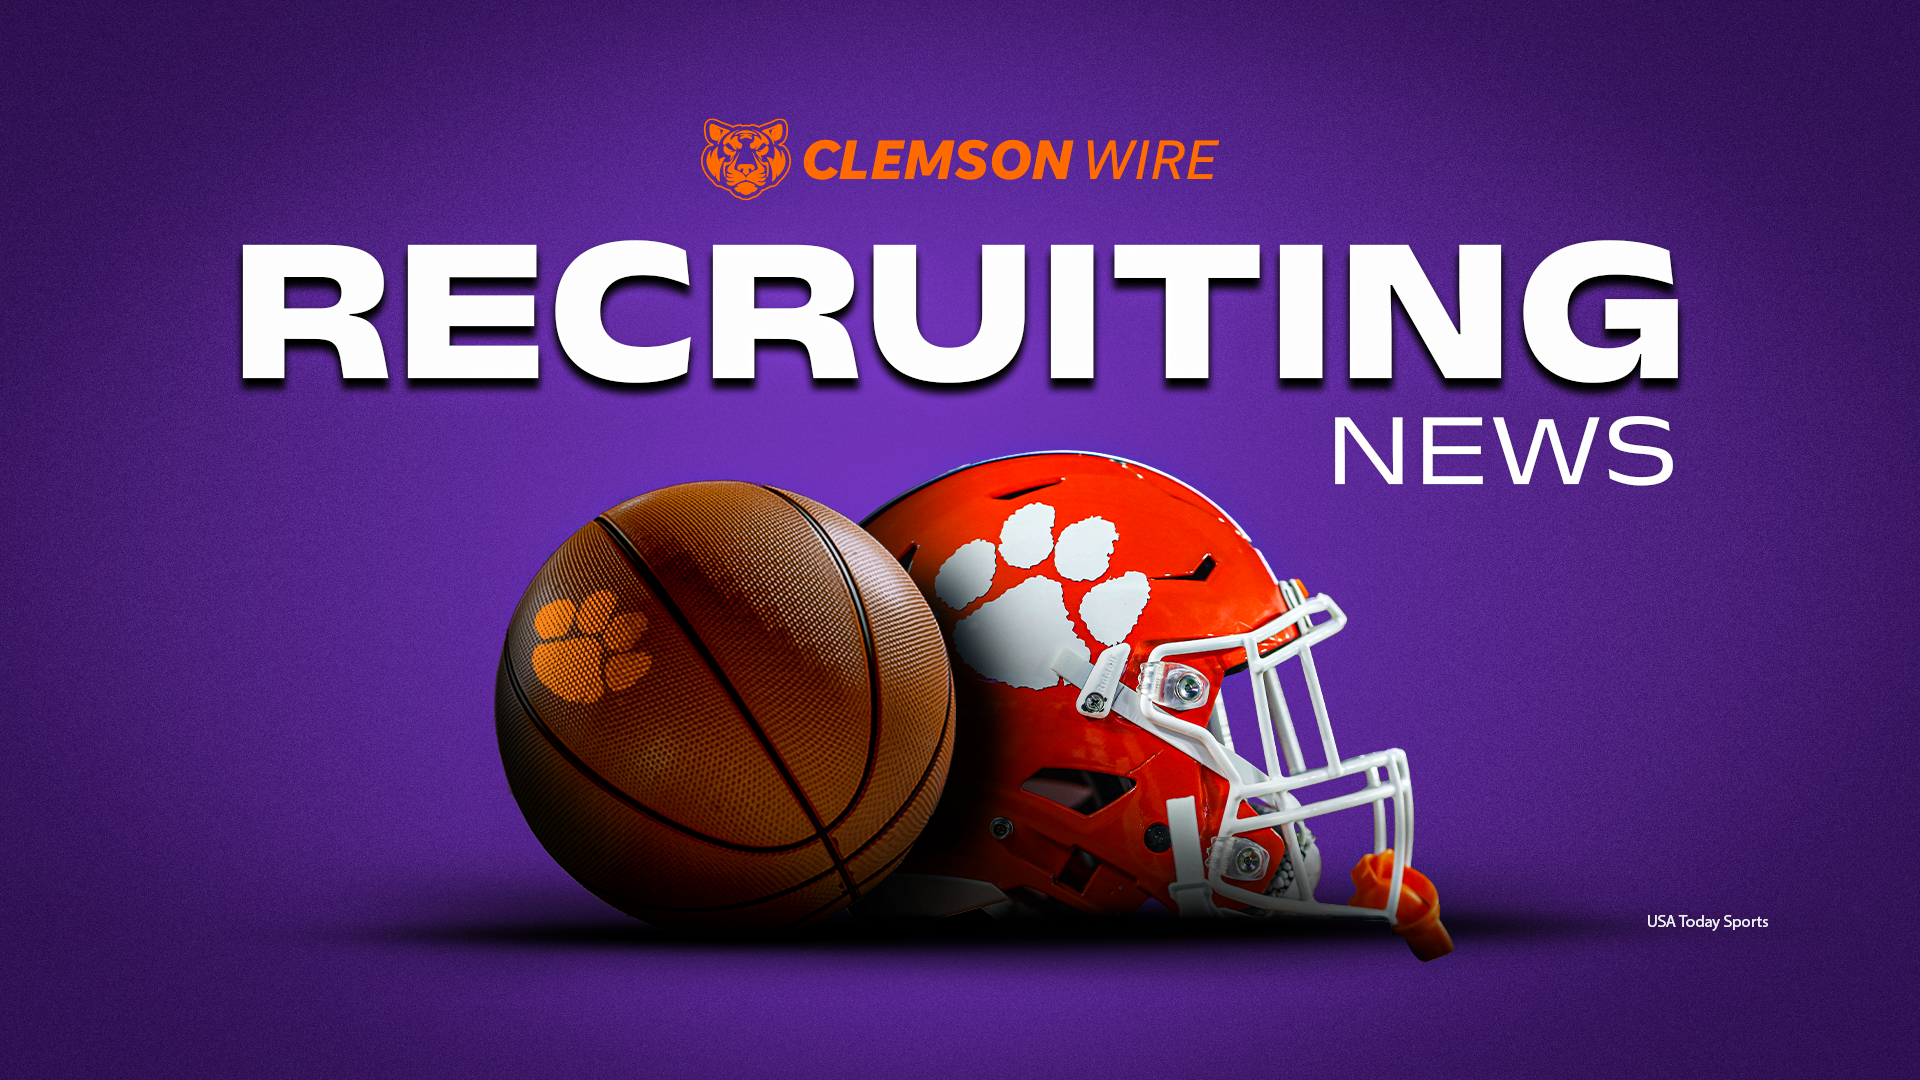 Clemson has seven recruits in updated Top247 rankings